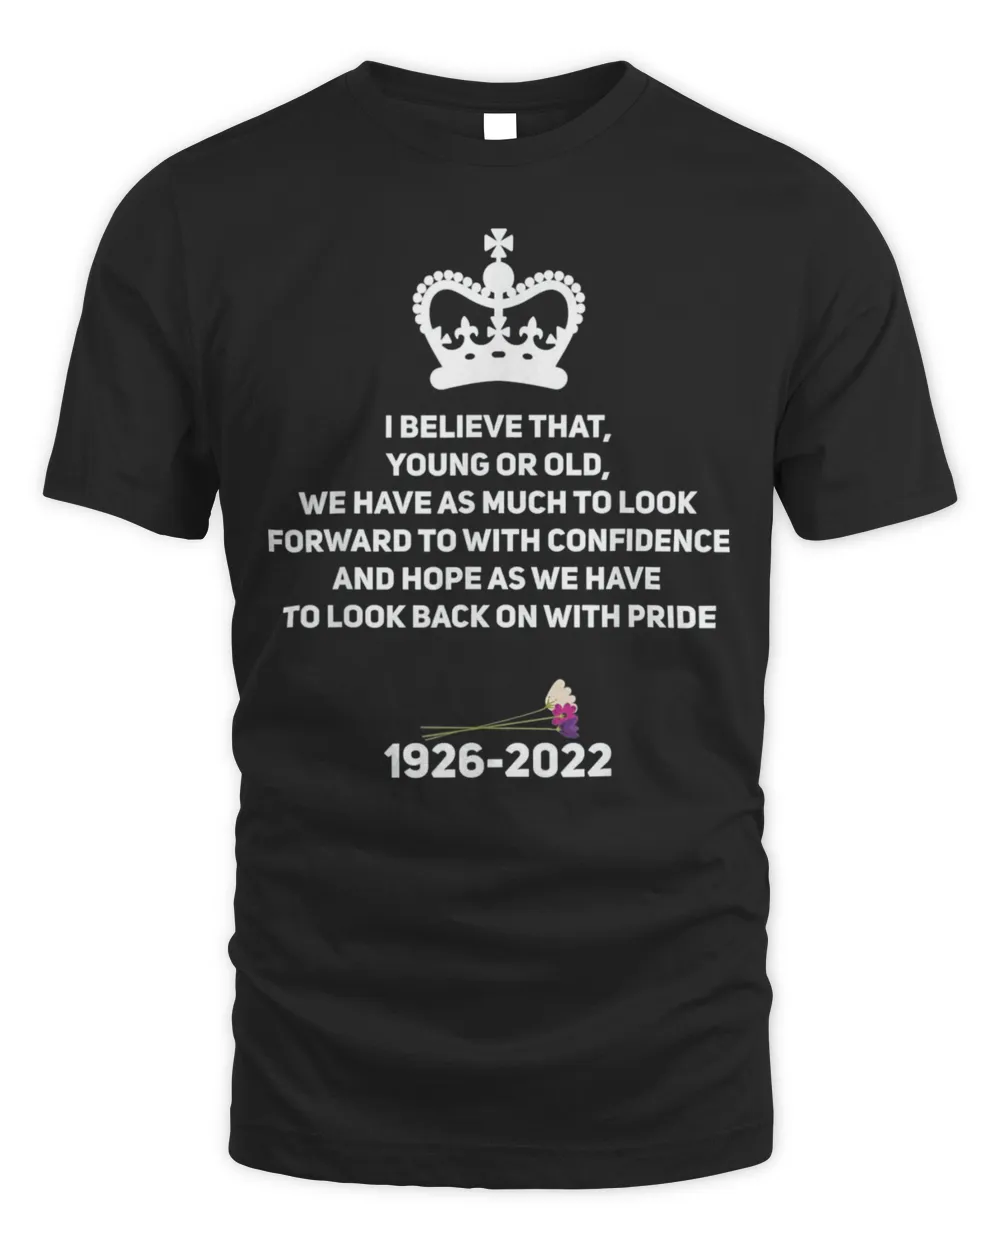 The Queen of England Quotes Apparel Shirt